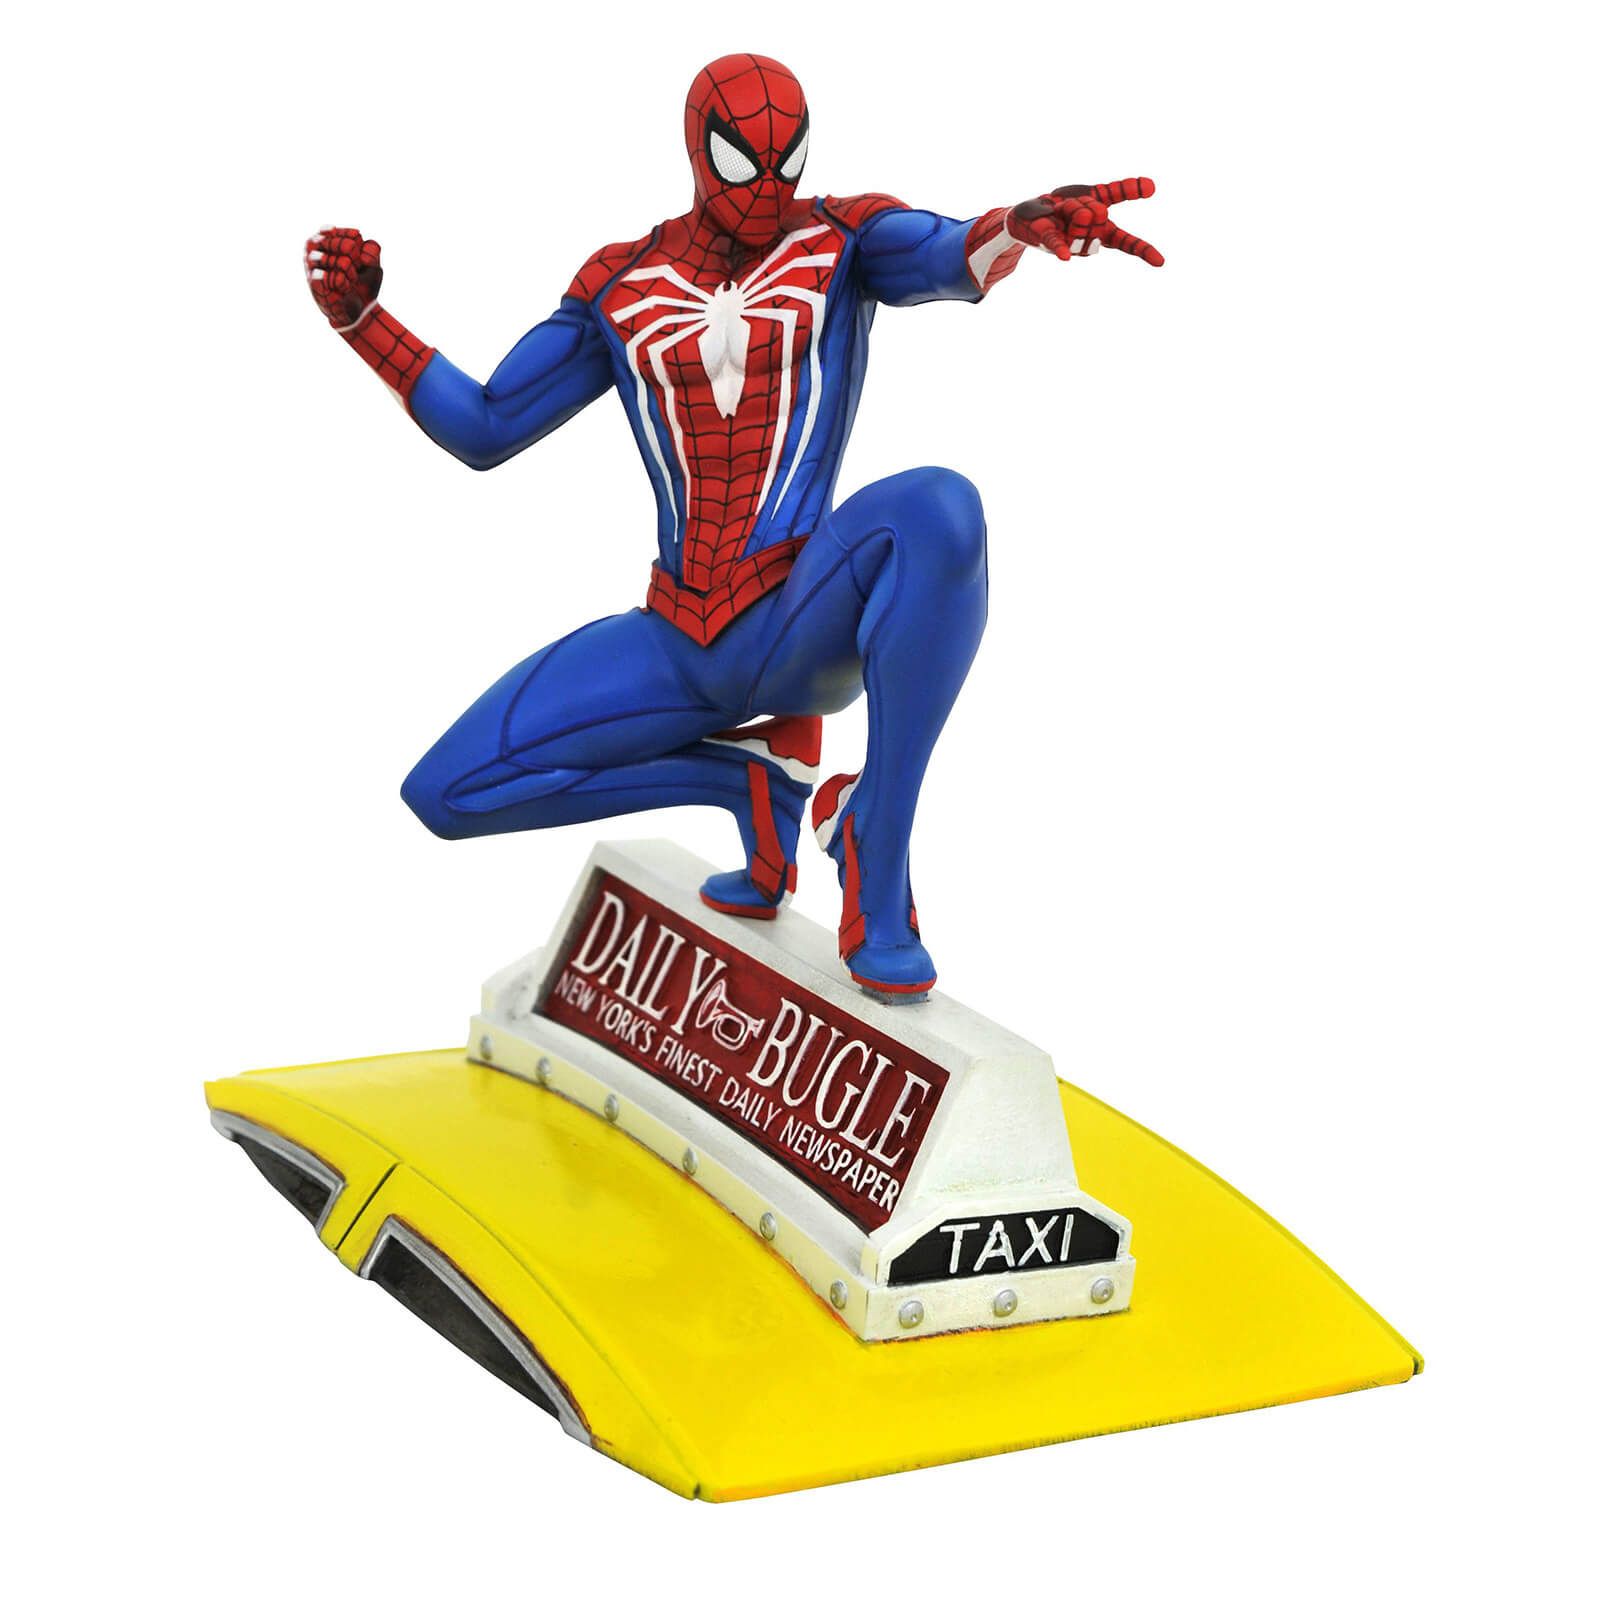 Diamond Select Marvel Gallery Spider-Man (PS4) PVC Figure - Spider-Man On Taxi